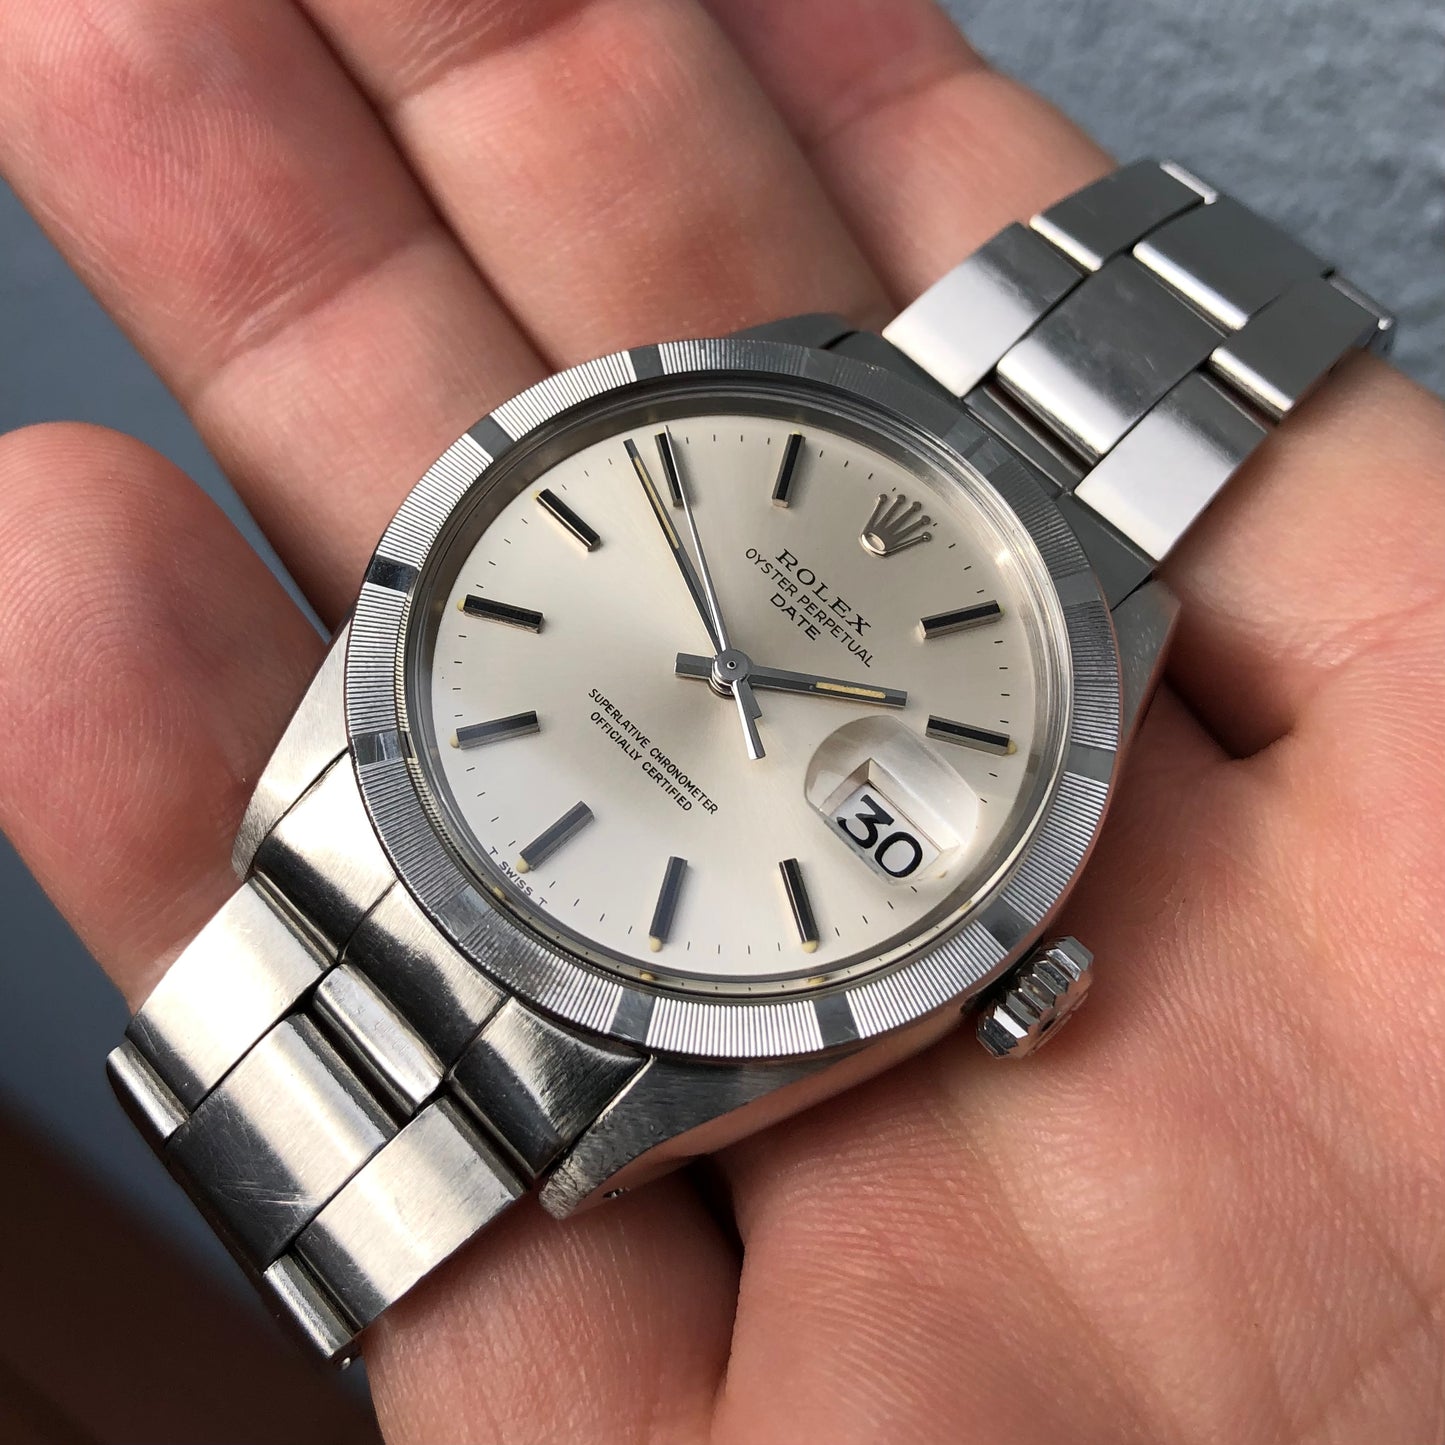 1970 Rolex Date 1501 Steel Engine Turned Oyster Silver Dial Wristwatch with PX Store Recepit and Punched Papers - Hashtag Watch Company